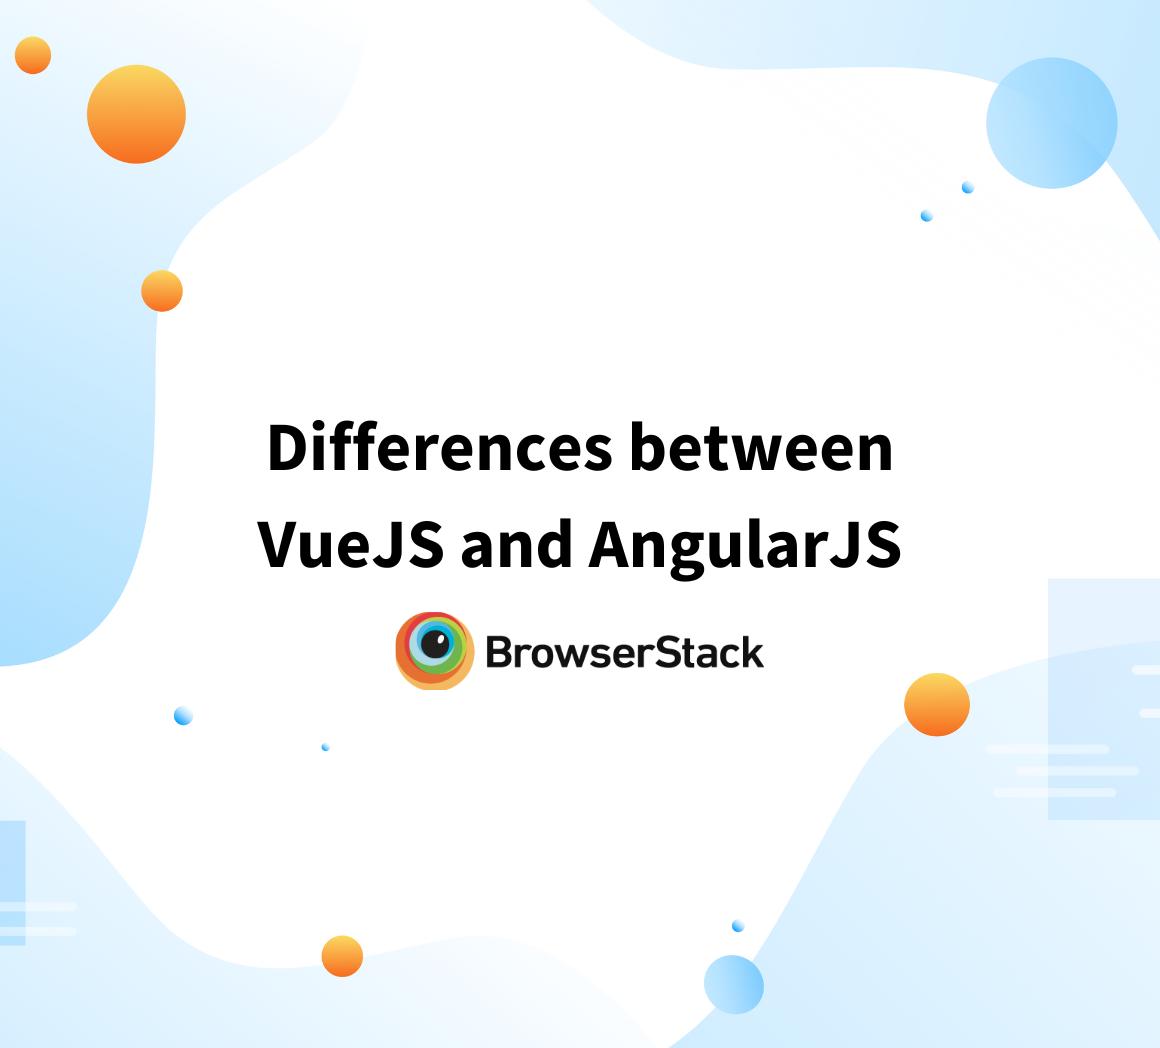 Differences between VueJS and AngularJS